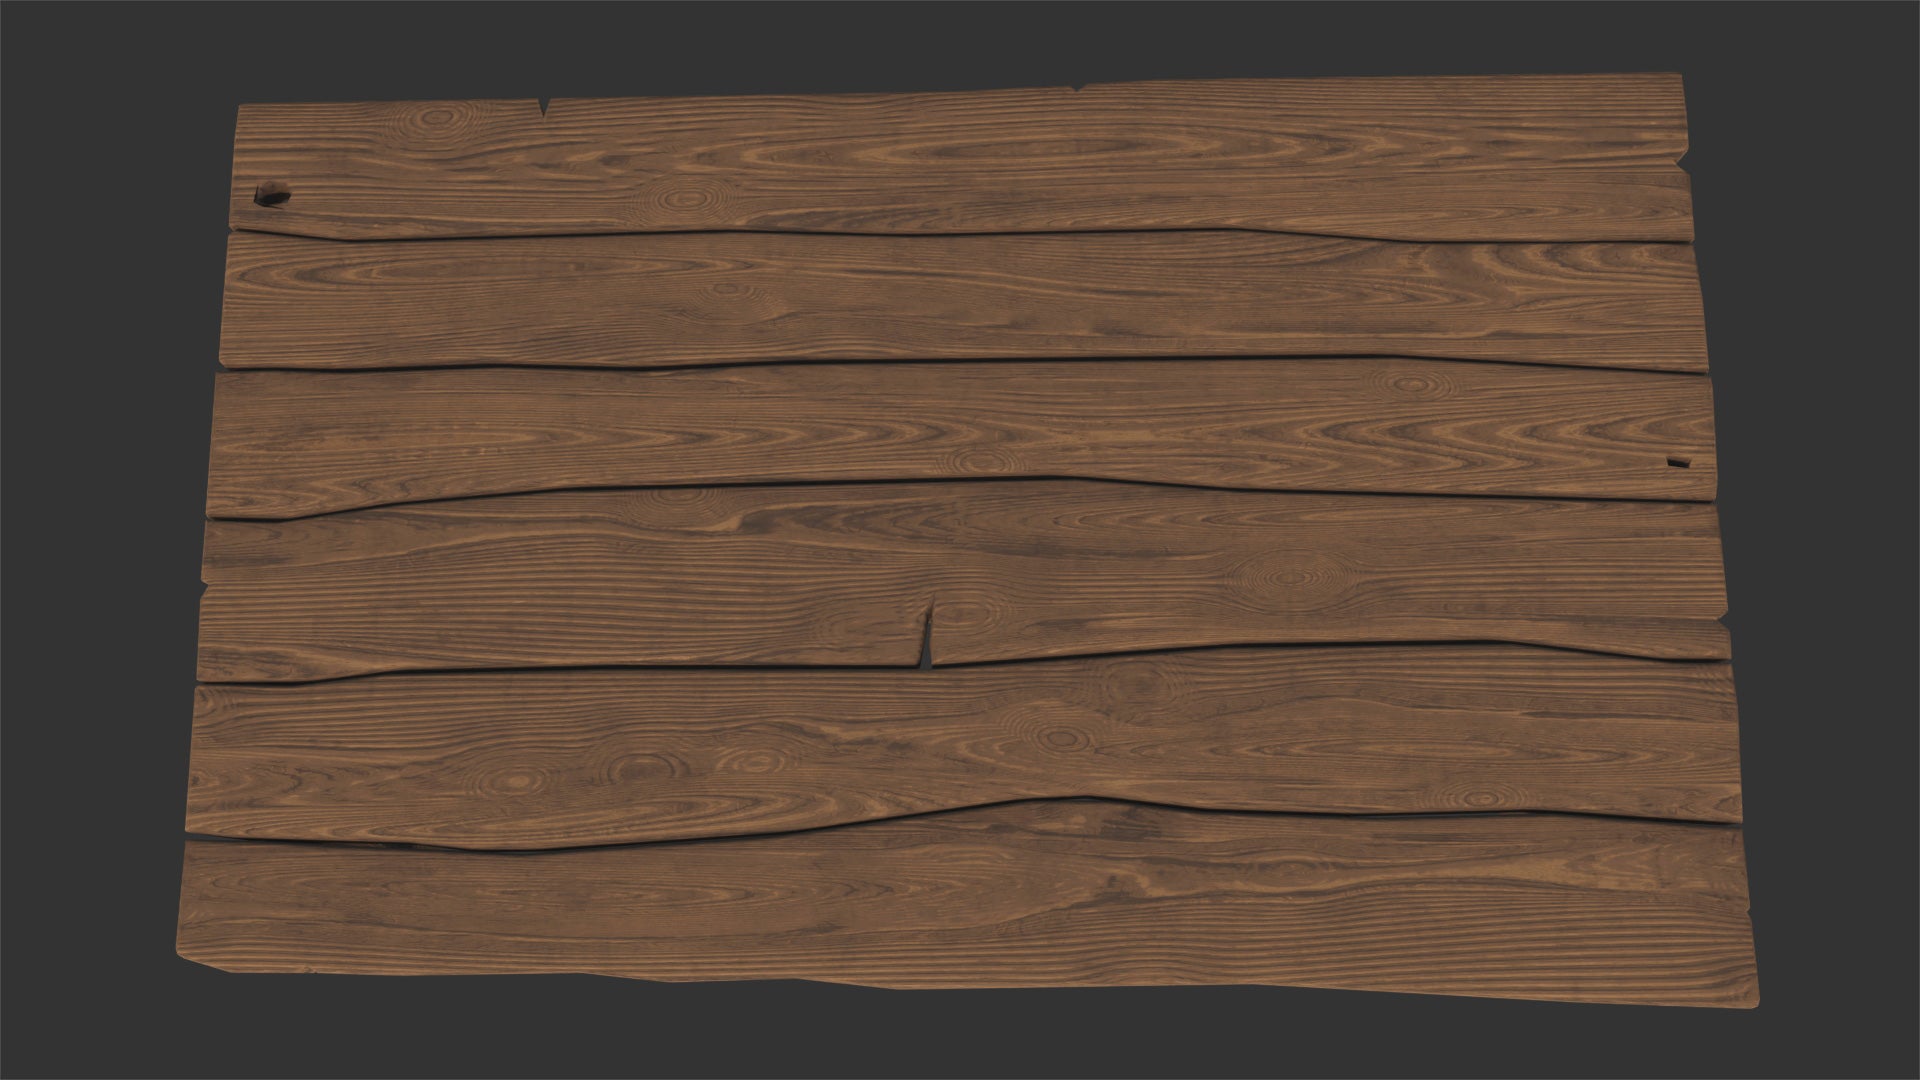 3d model of a table made of wood boards. The boards are very uneven and rough. The model is lowpoly and PBR